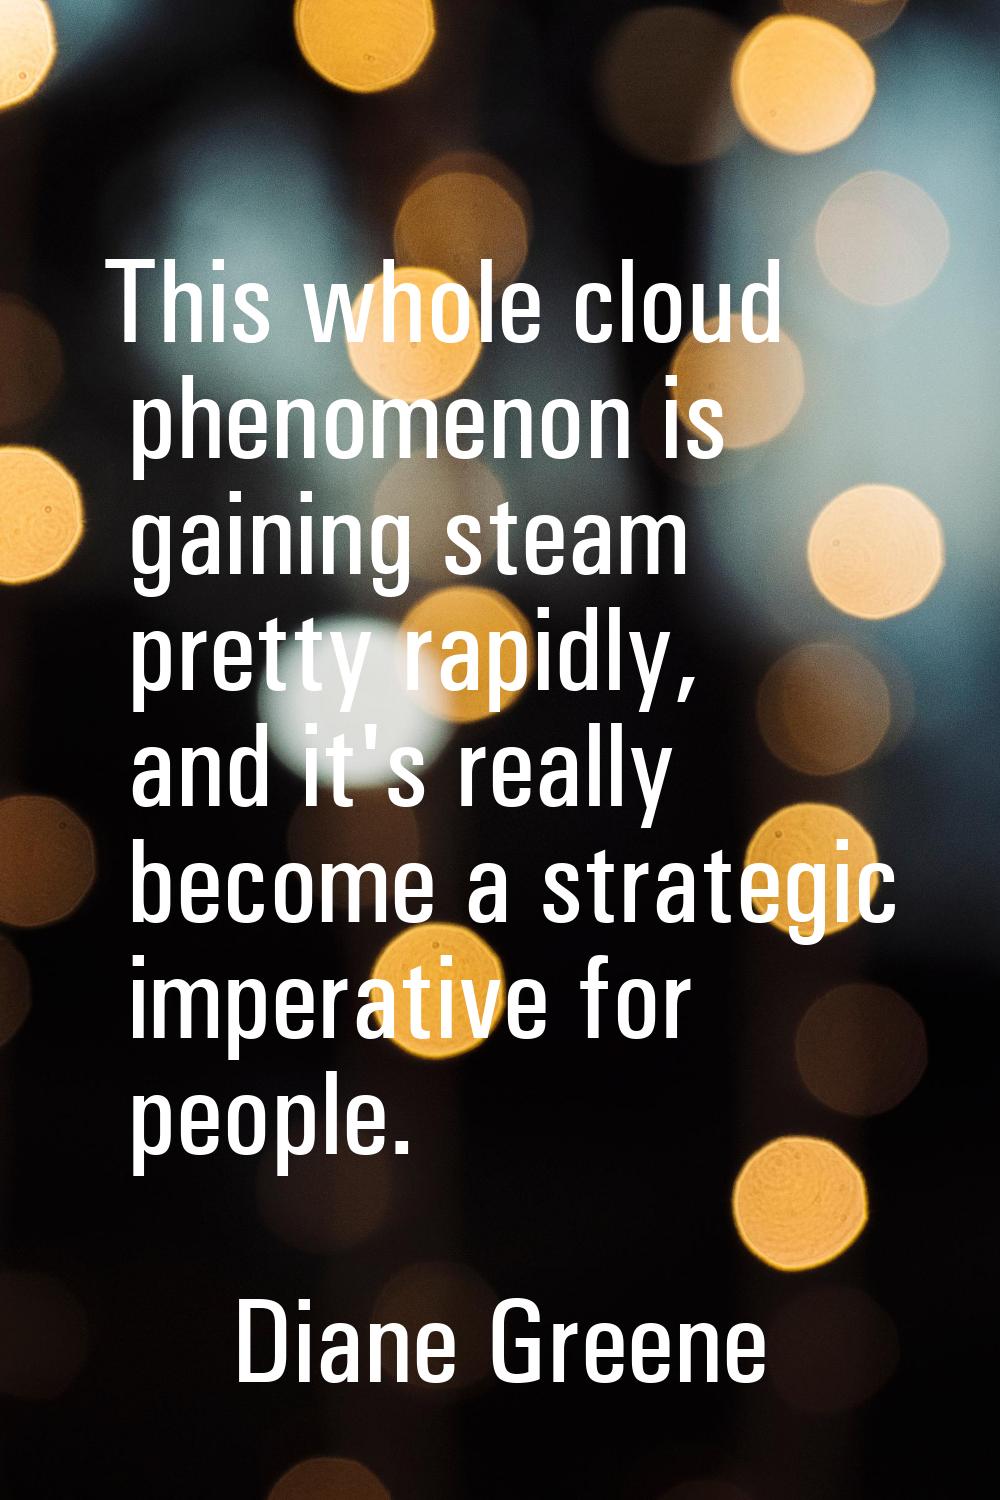 This whole cloud phenomenon is gaining steam pretty rapidly, and it's really become a strategic imp